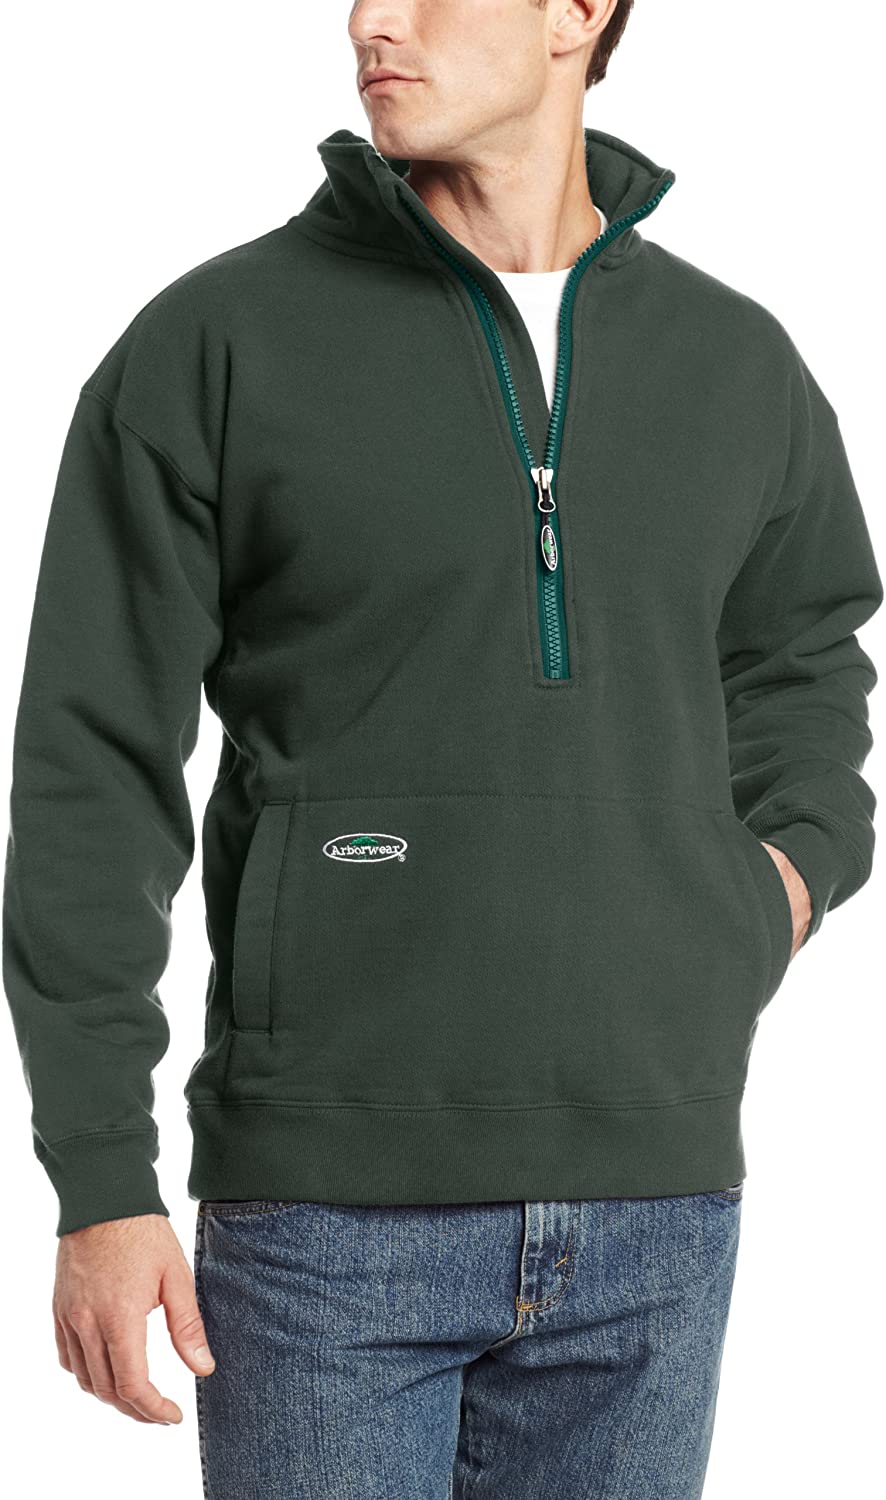 Arborwear Men's Double Thick 1/2 Zip Sweatshirt in Forest Green from the from